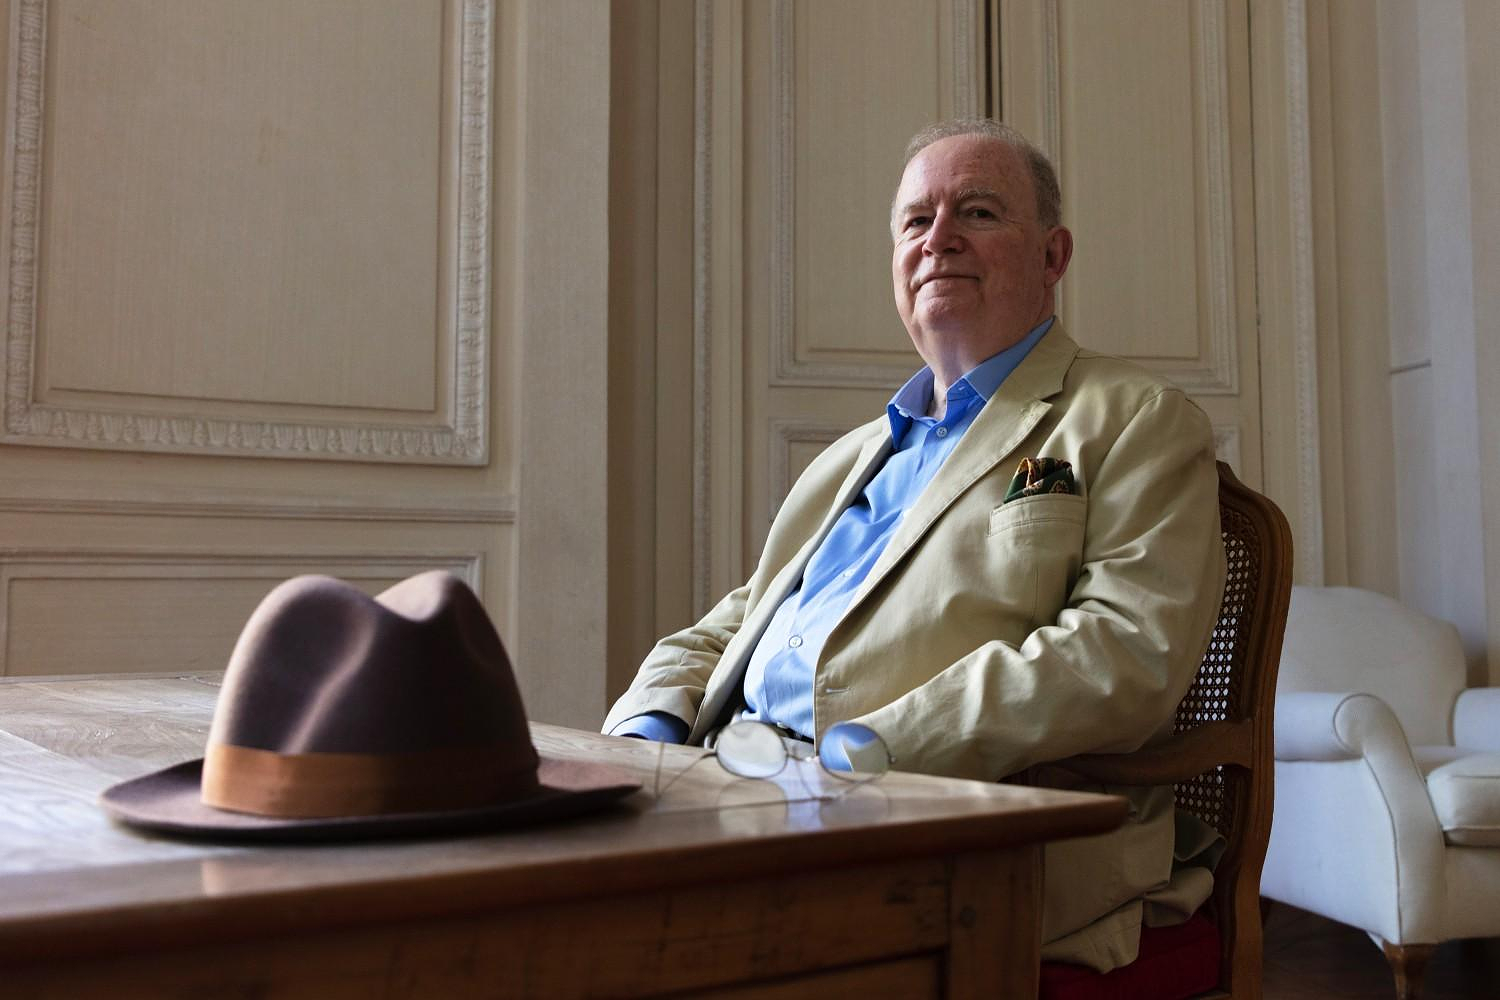 The philosopher Christian Jambet elected to the French Academy